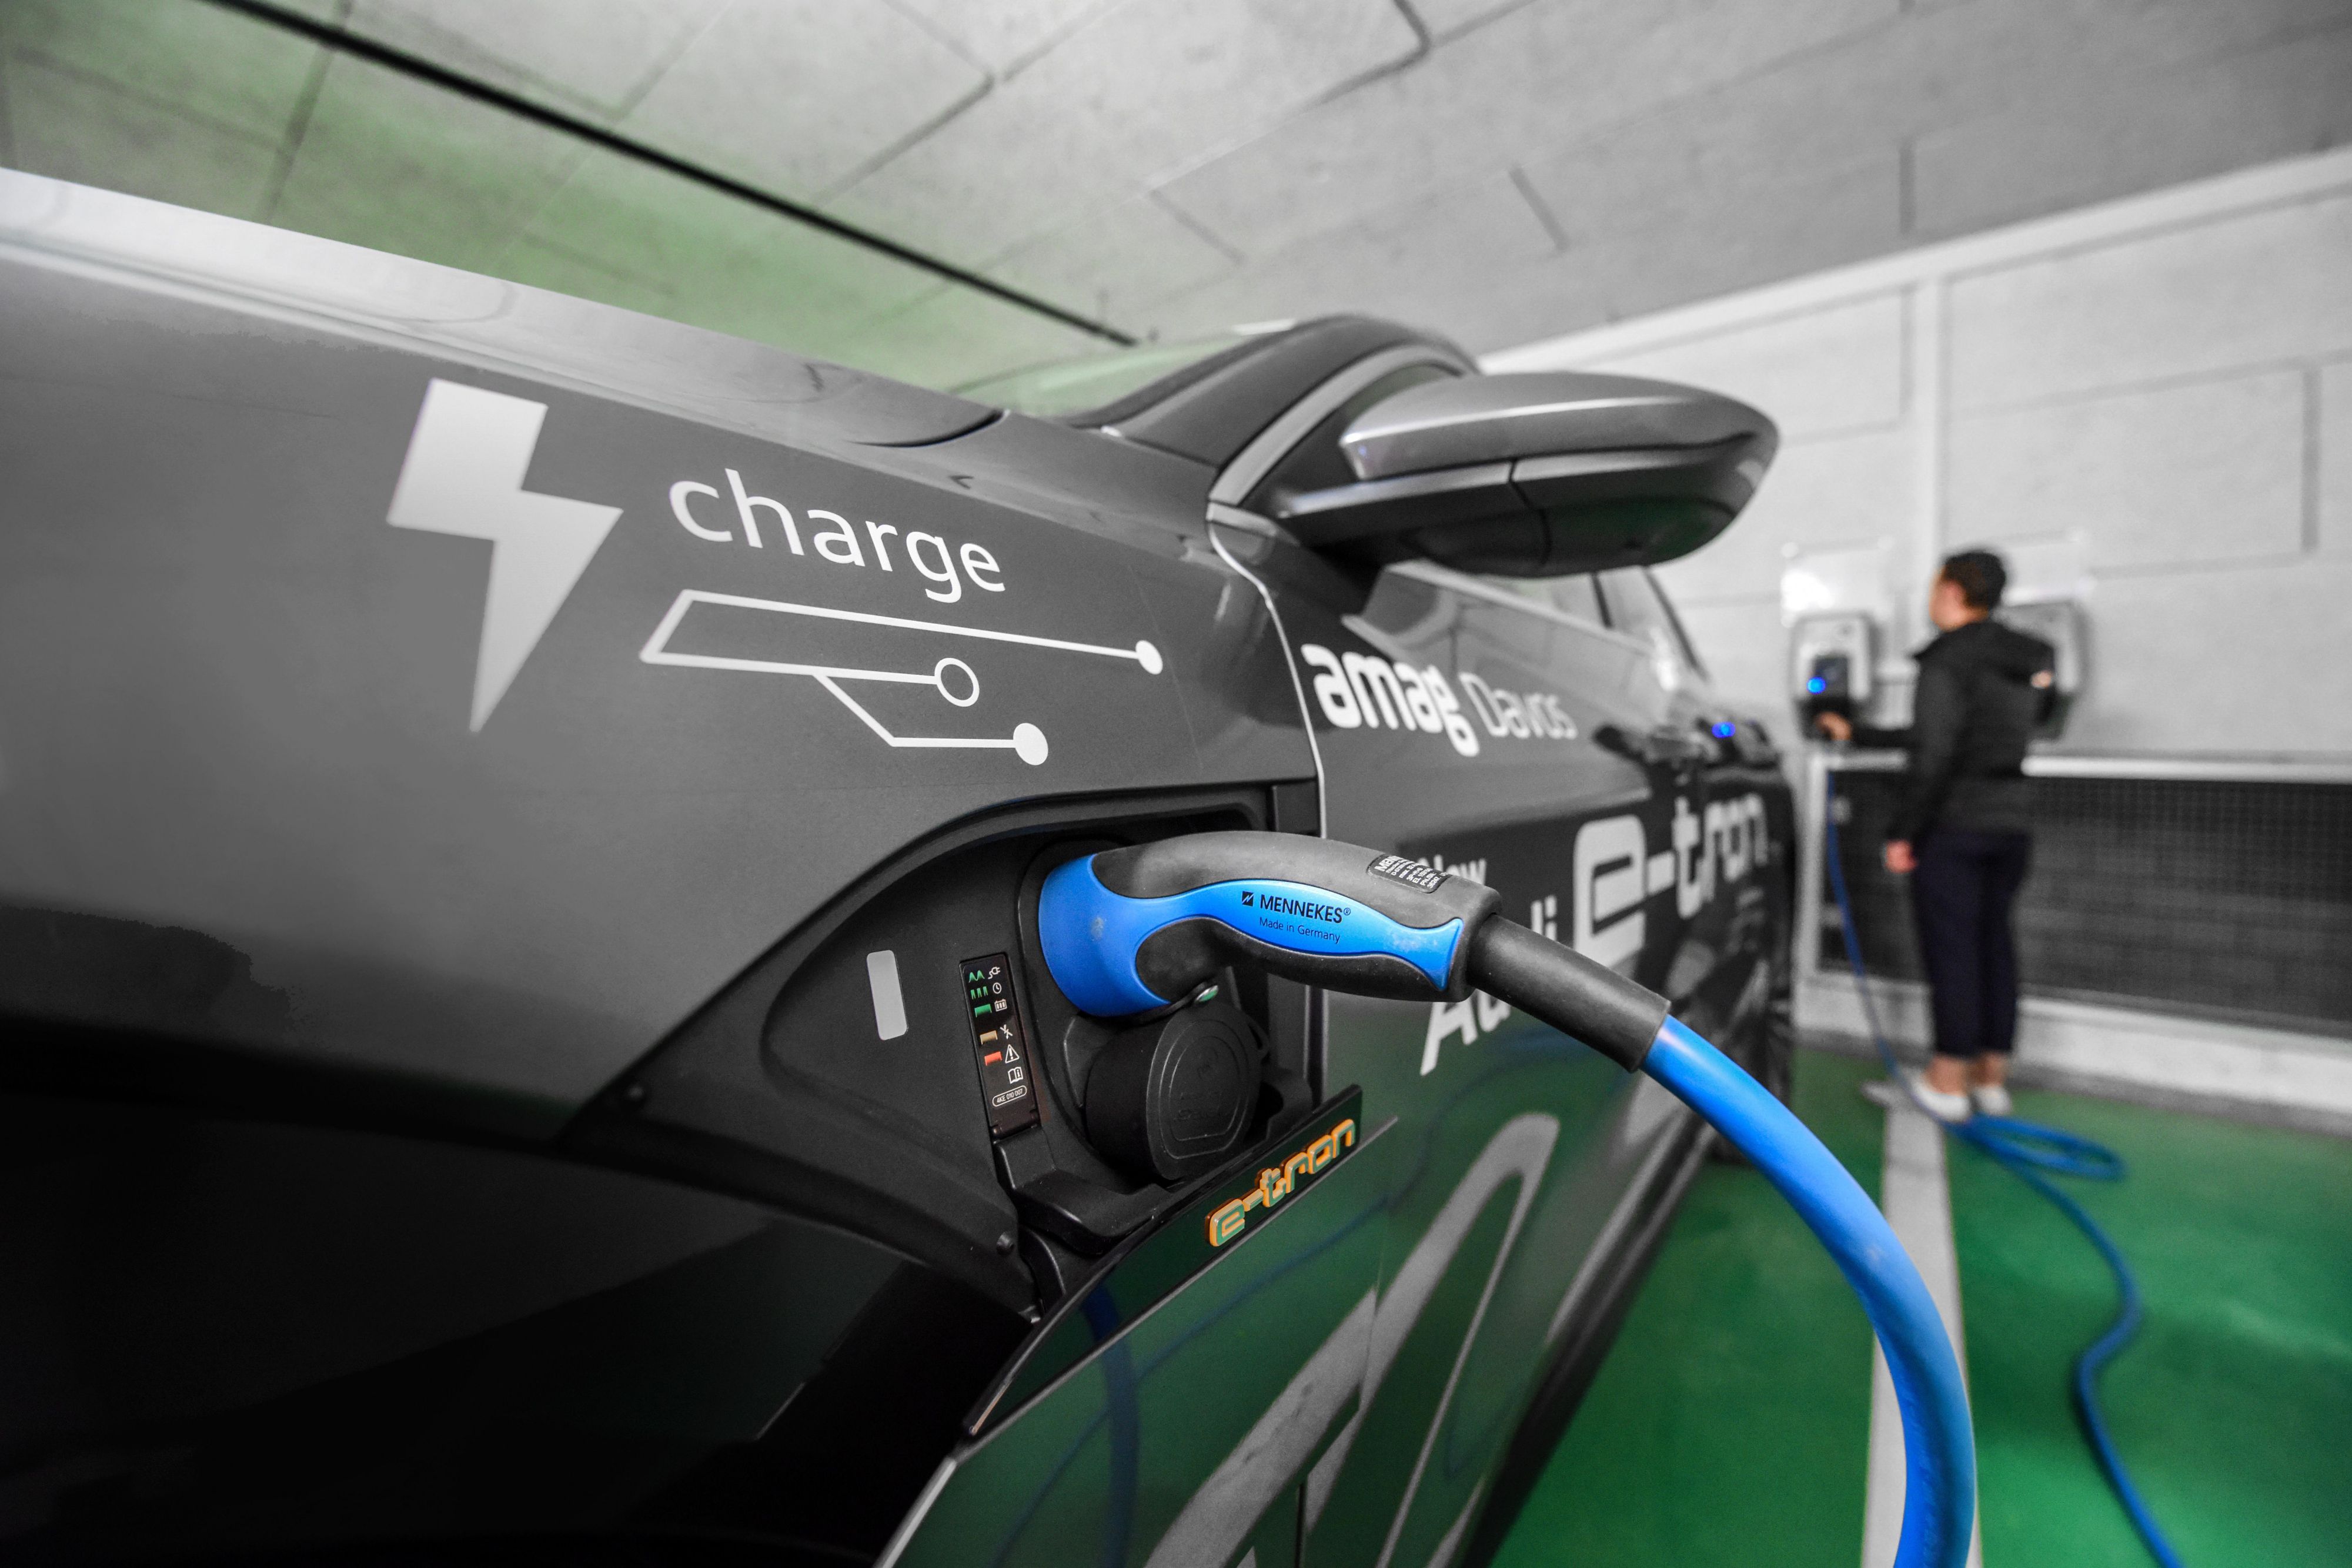 We offer hassle-free and complimentary charging for electric cars in our parking garage for hotel overnight guests.